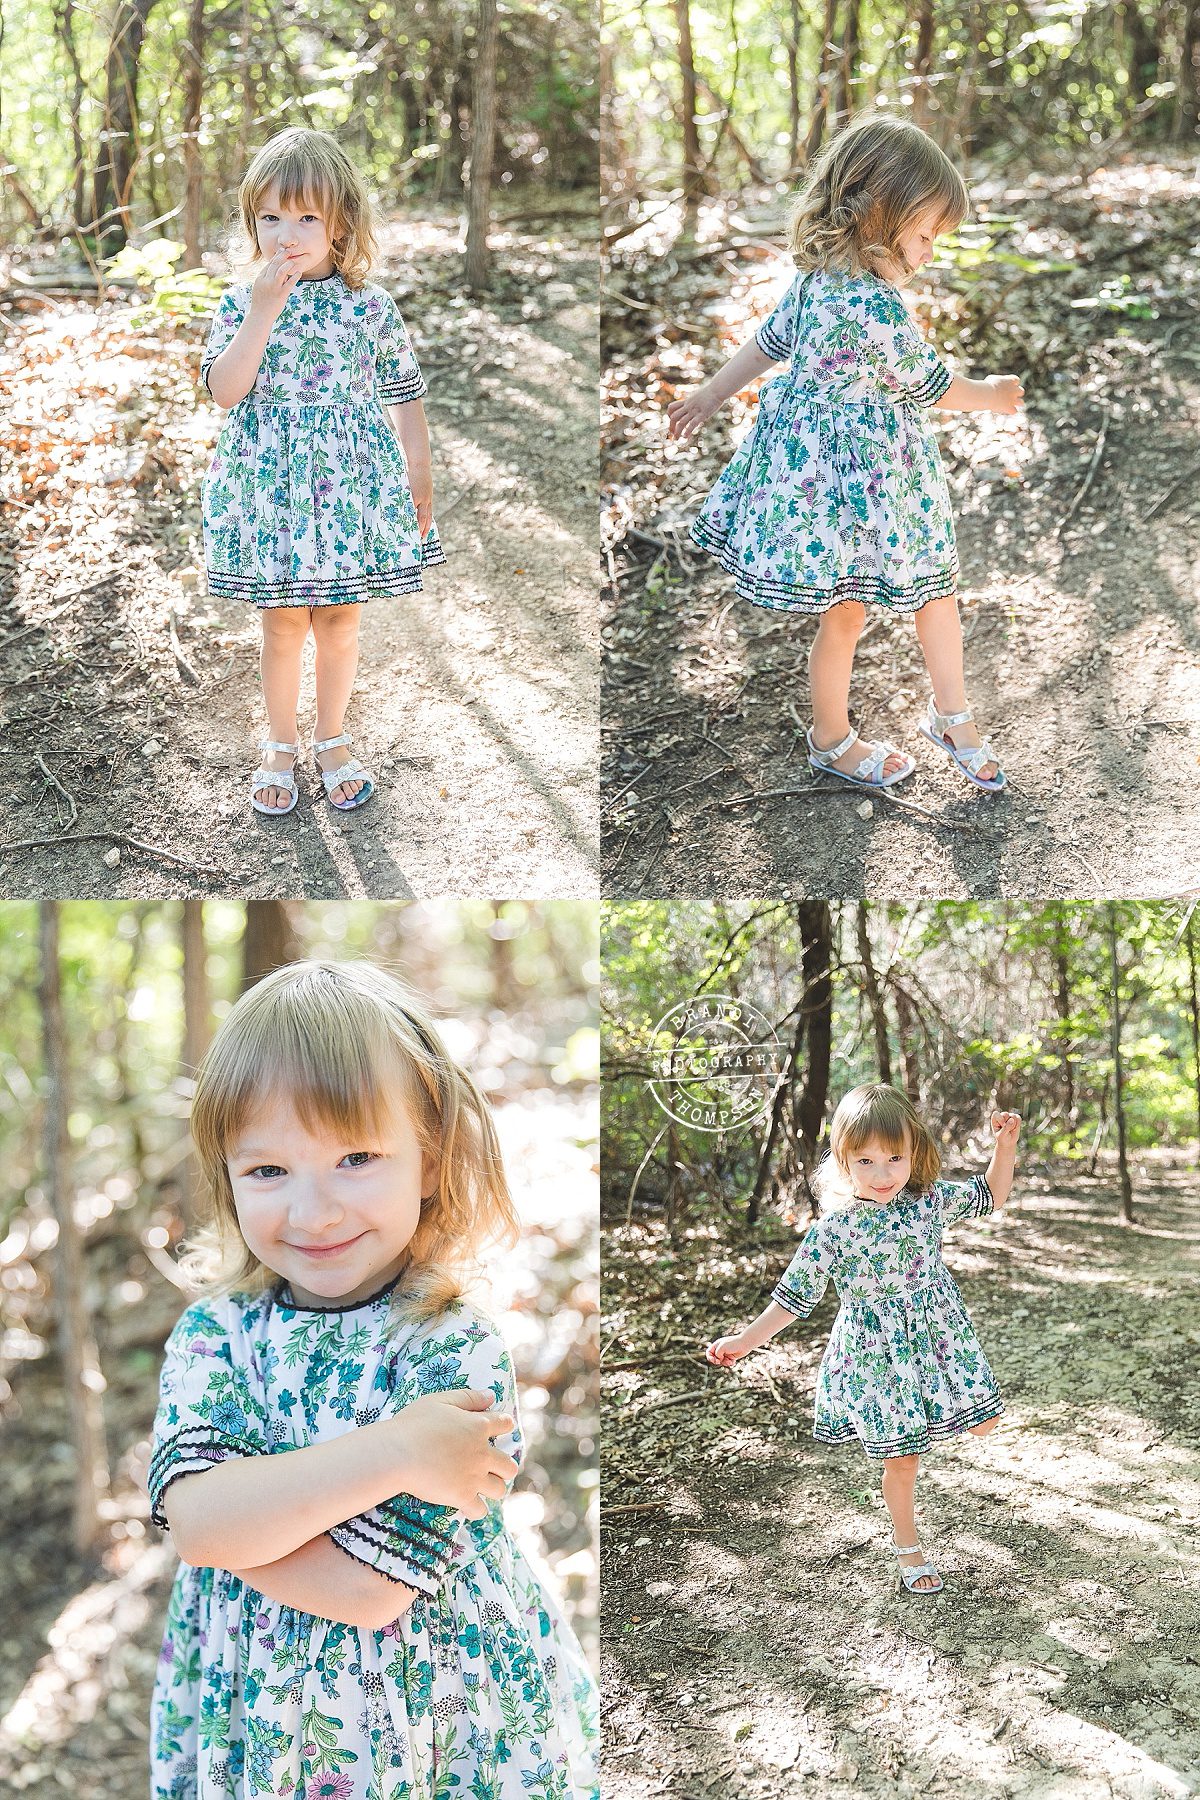 photo collage of light skinned preschool girl with light hair, bangs and a blue floral dress, twirling in the woods